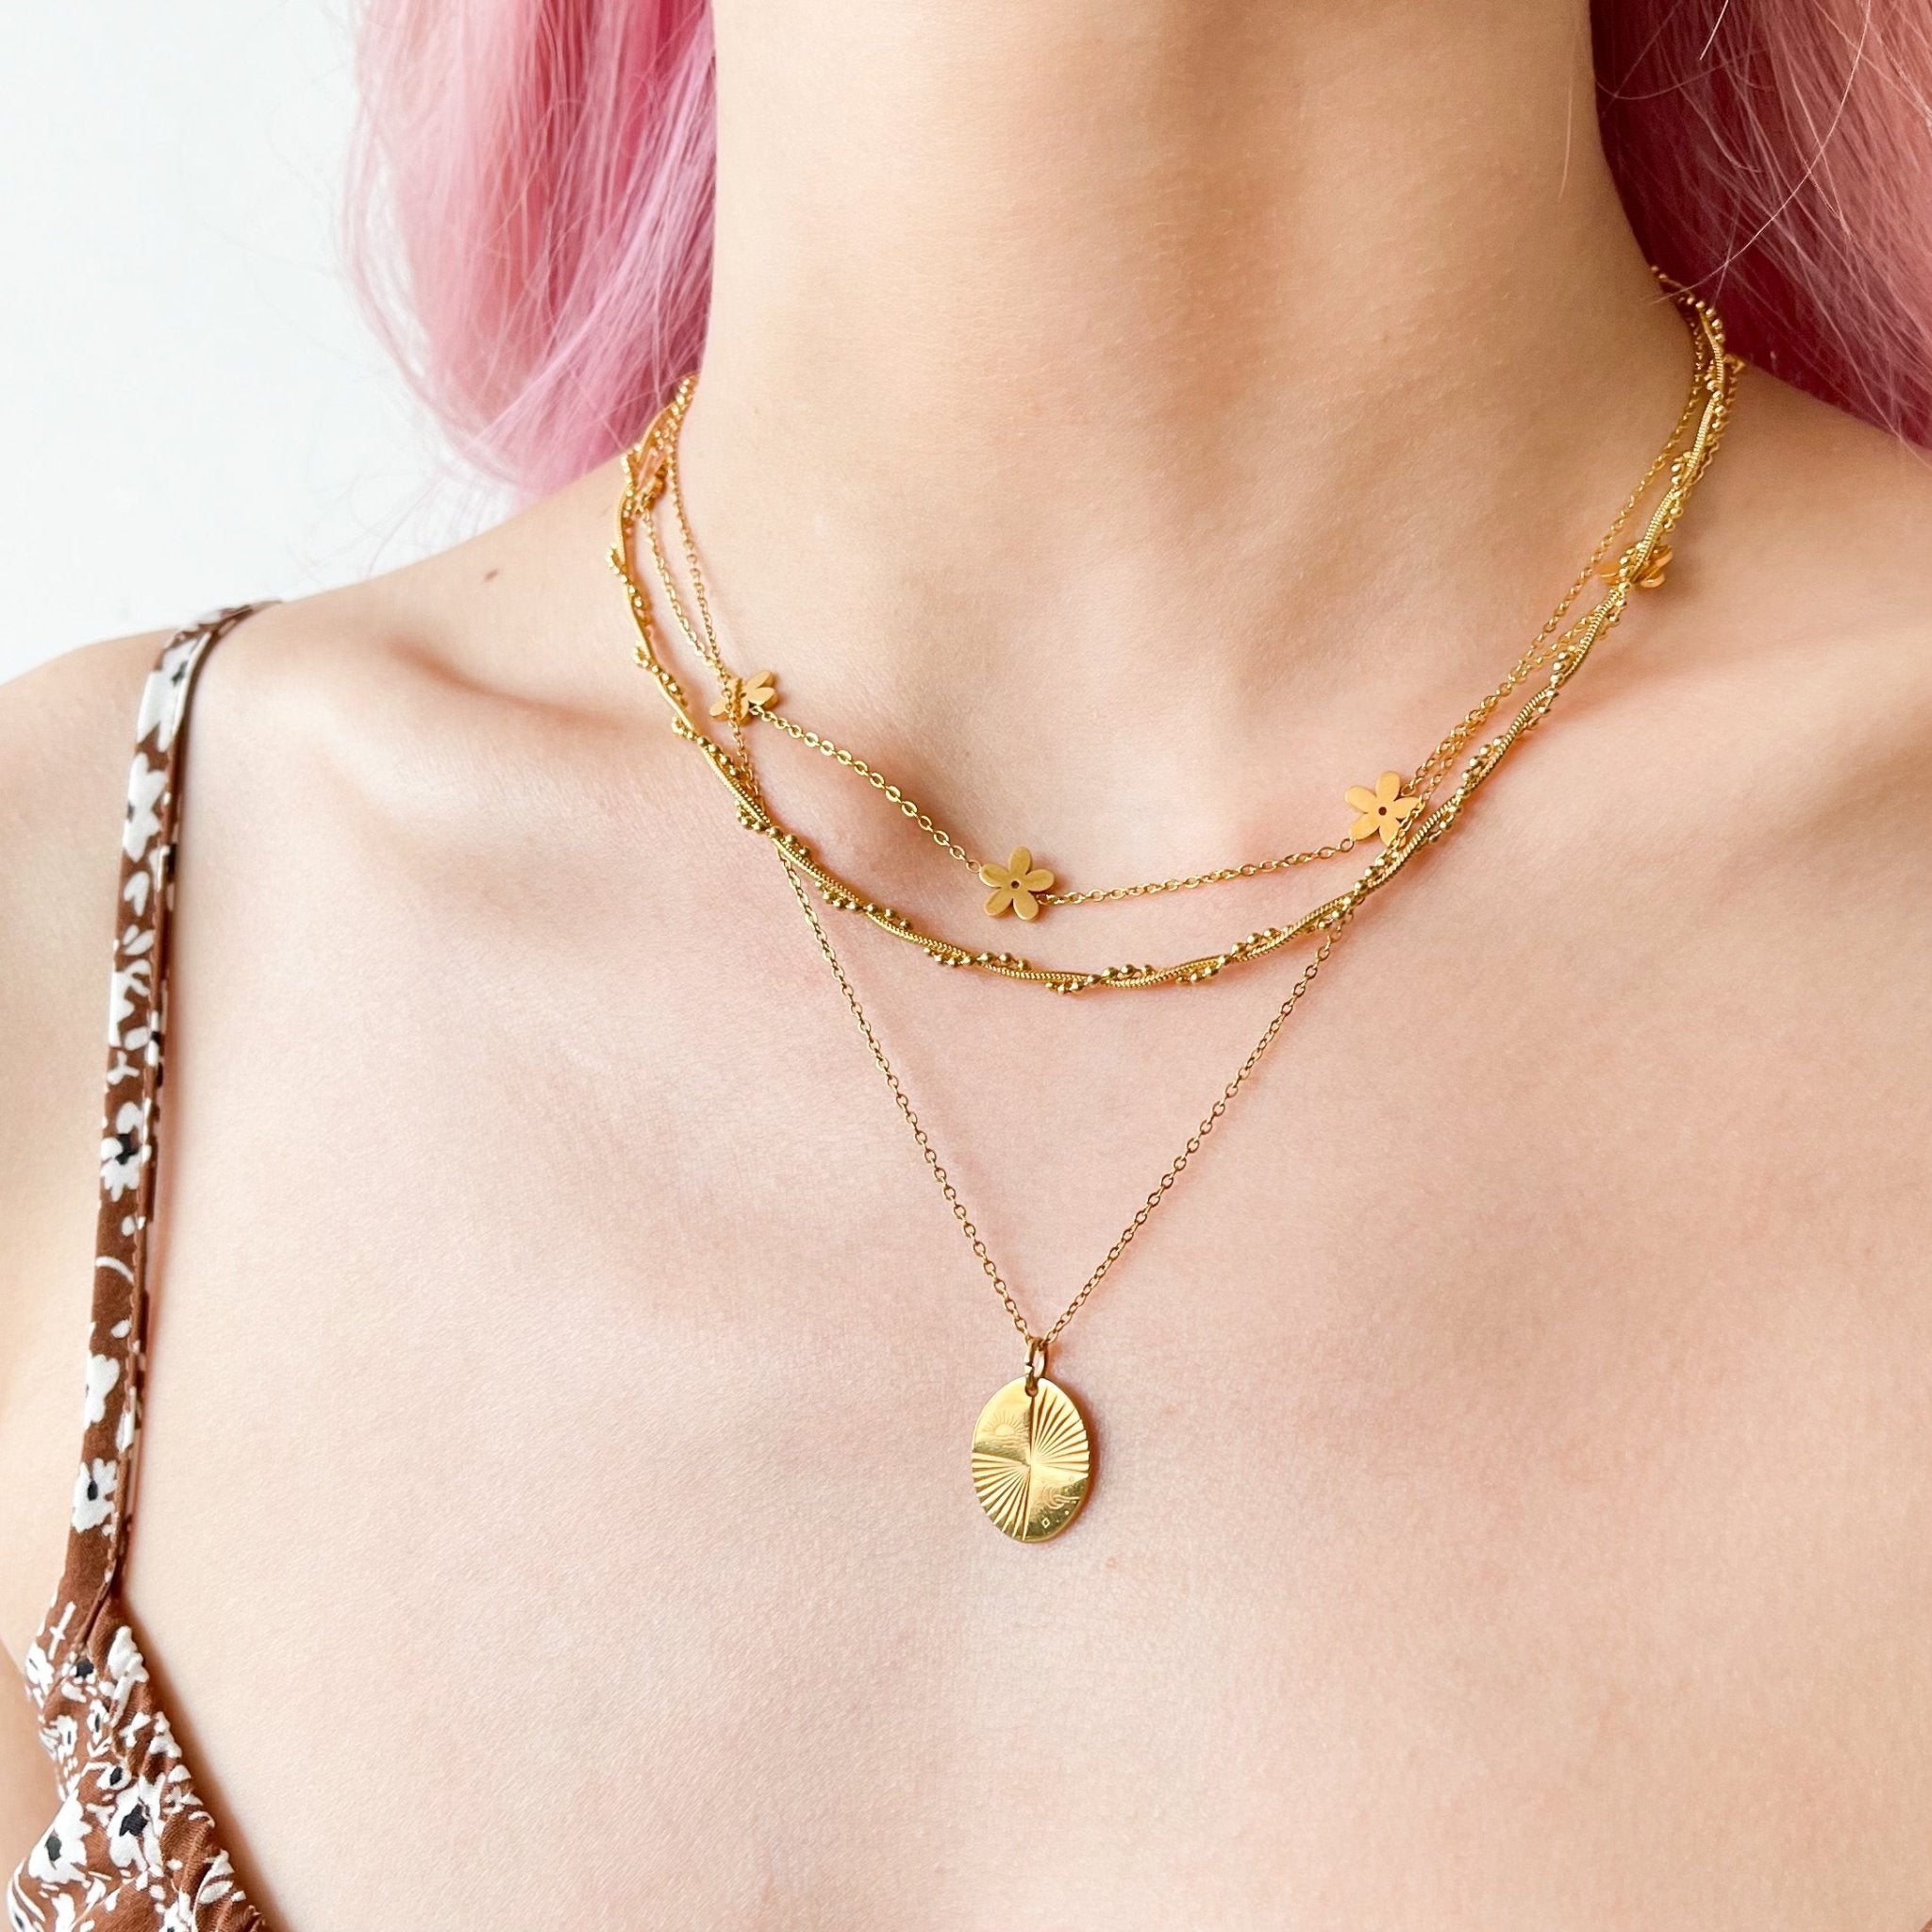 Simply Floral Choker Necklace in Gold - Flaire & Co.